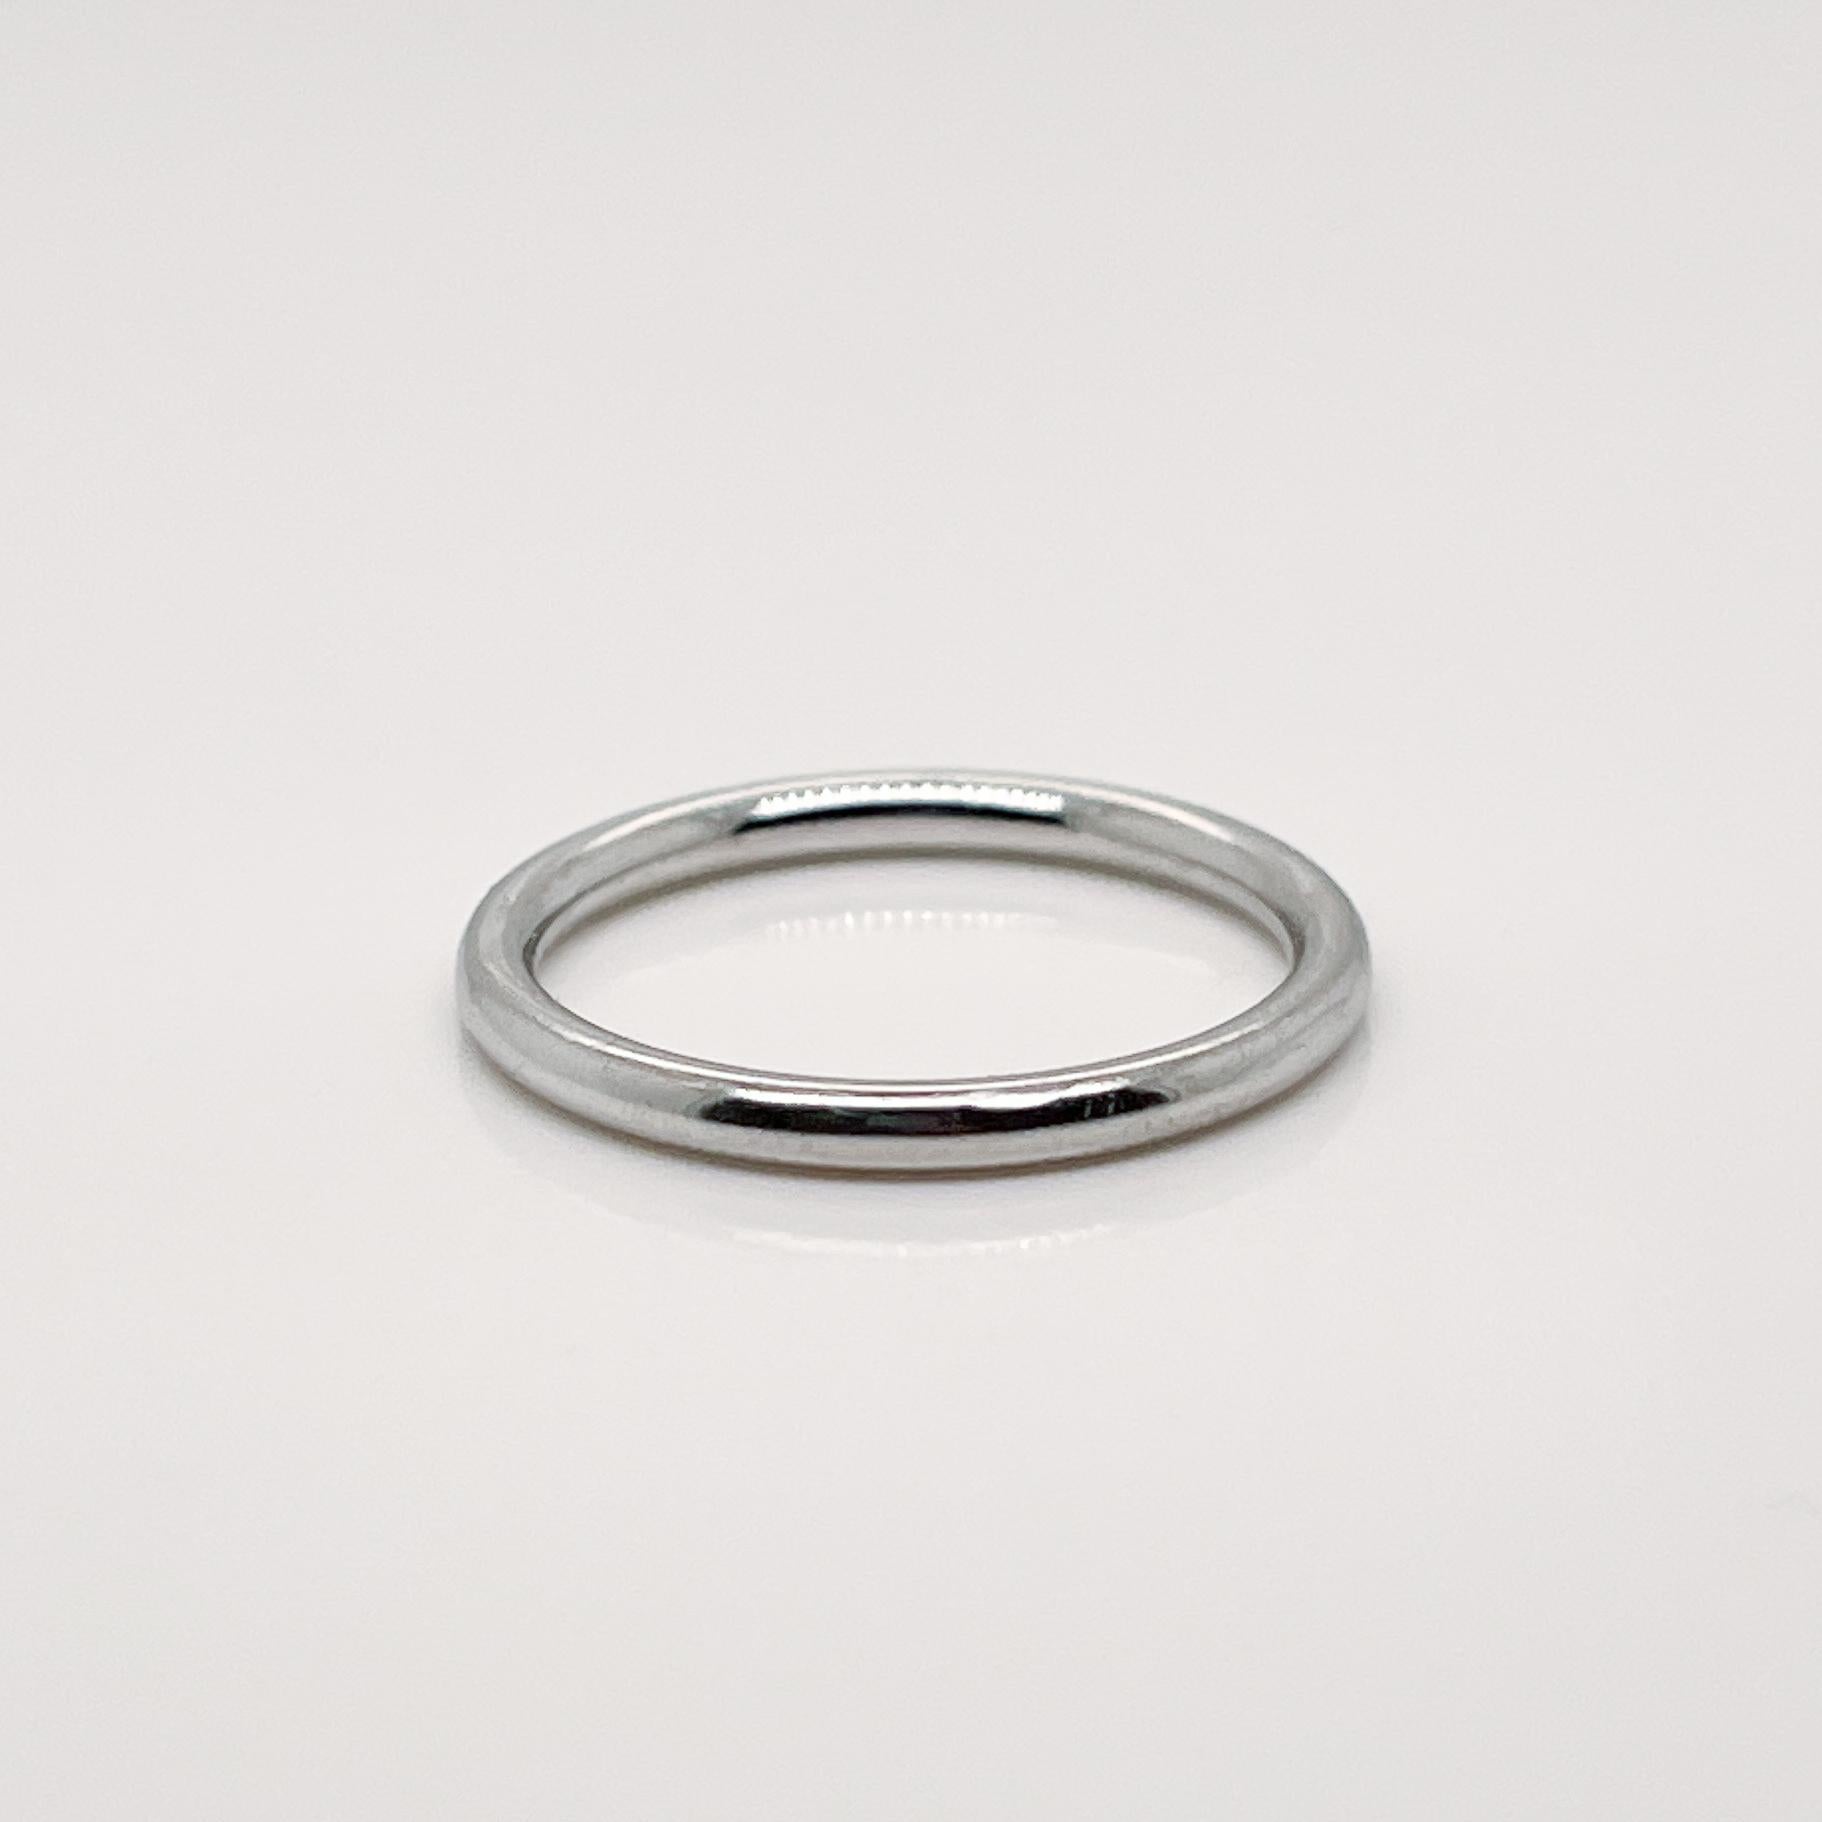 A very fine Tiffany & Co. ring.

In platinum.

Simply a wonderful ring by Tiffany & Co.!

Date:
20th Century

Overall Condition:
It is in overall good, as-pictured, used estate condition with some very fine & light surface scratches and other signs